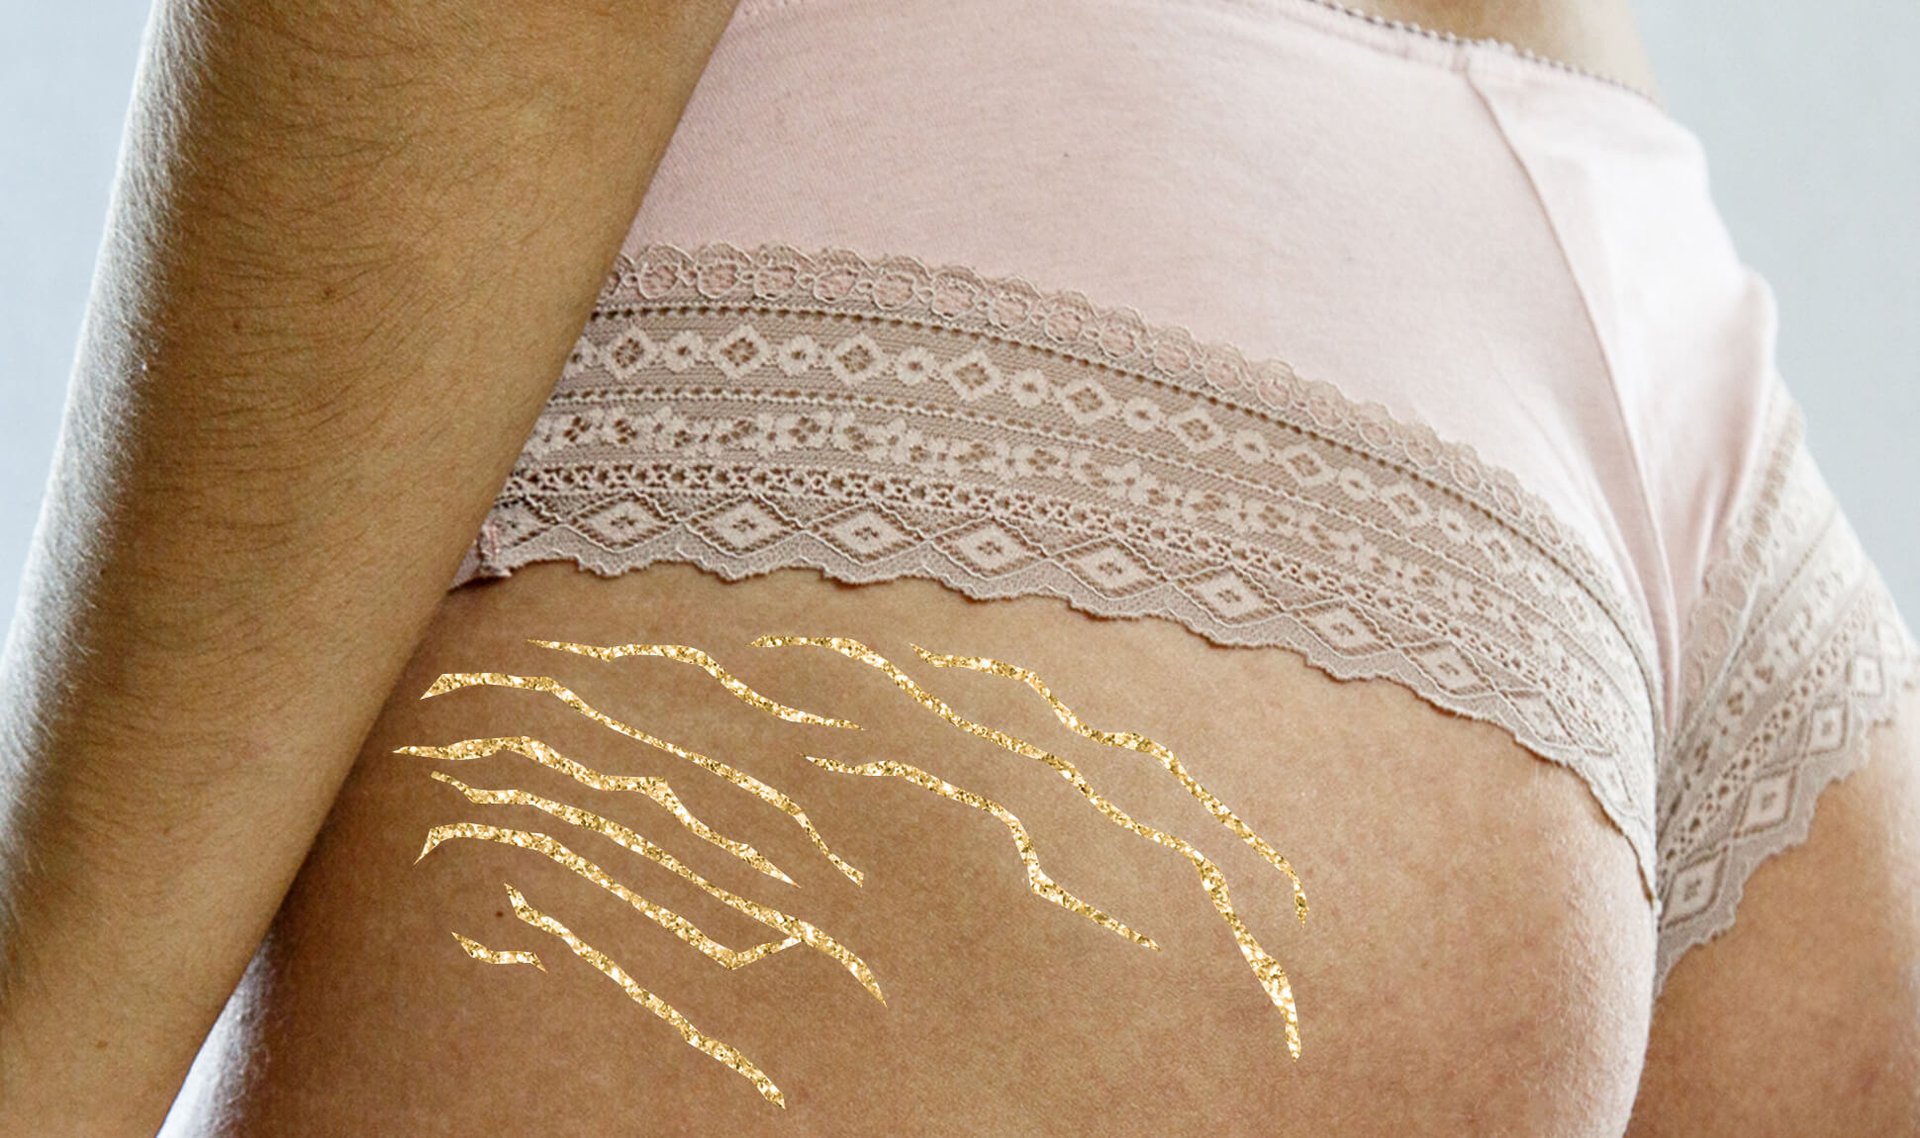 Can You Get Rid of Stretch Marks?